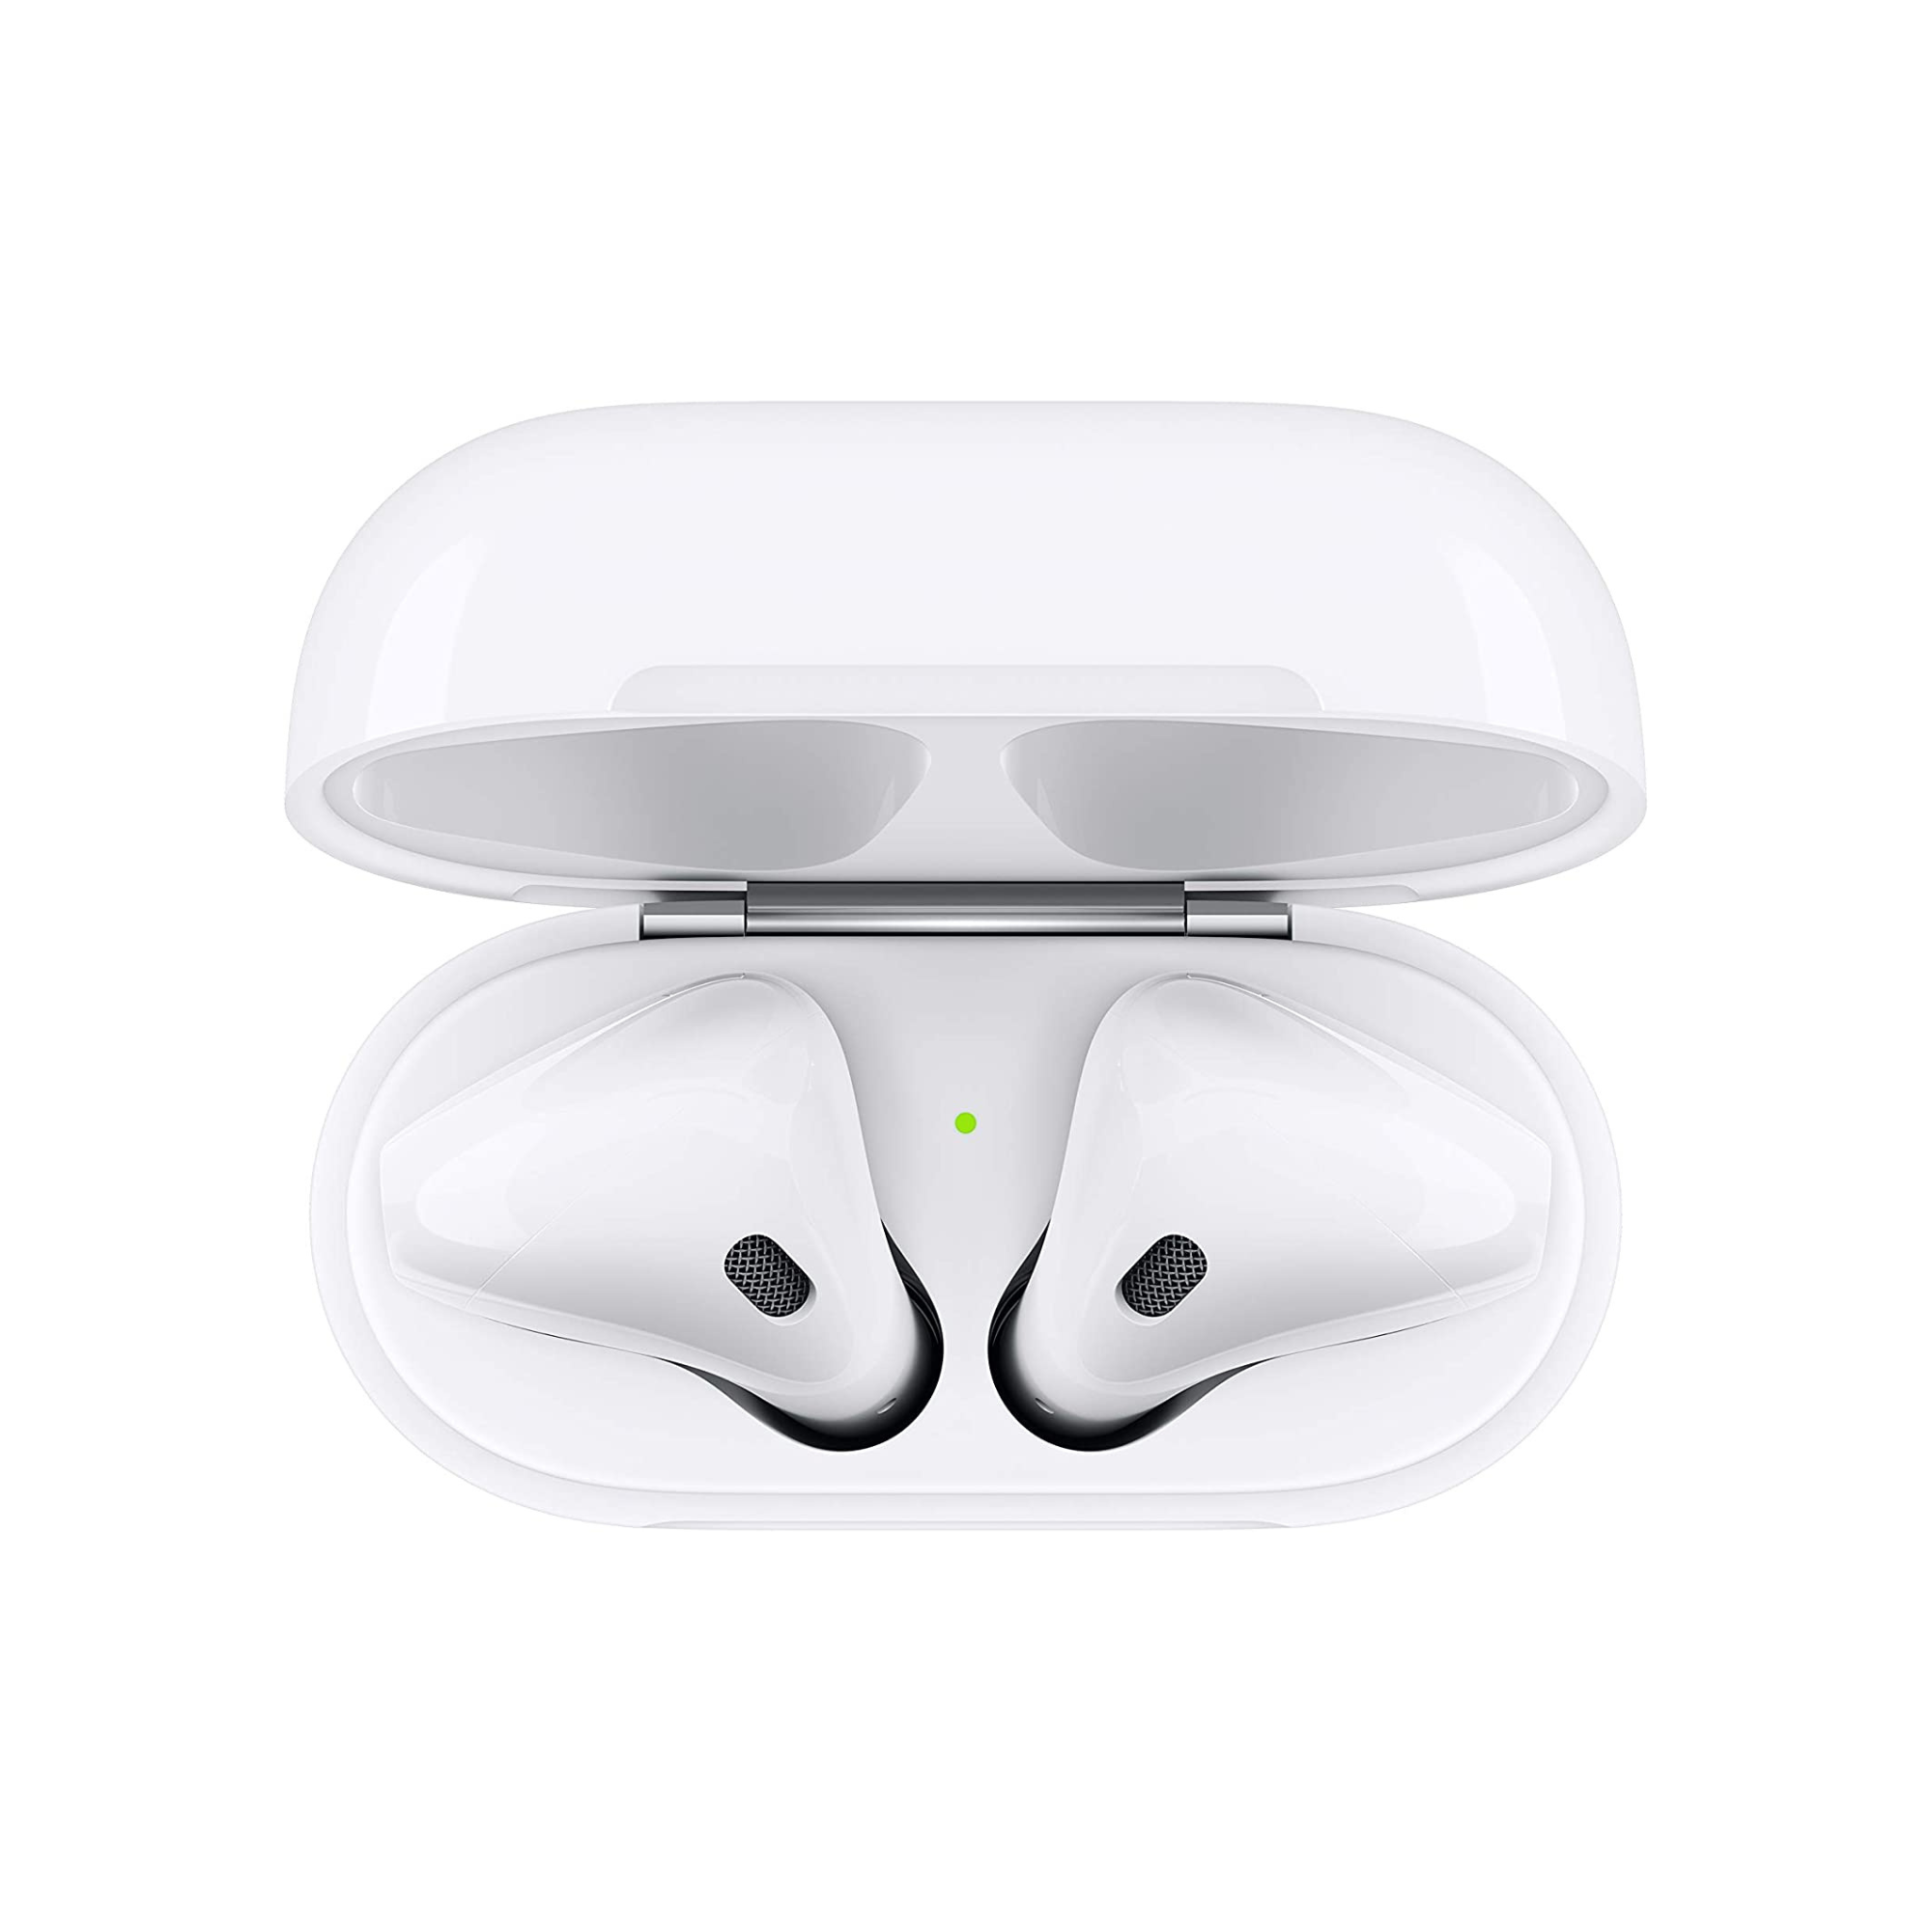 Apple AirPods with Charging Case (Latest Model) - White